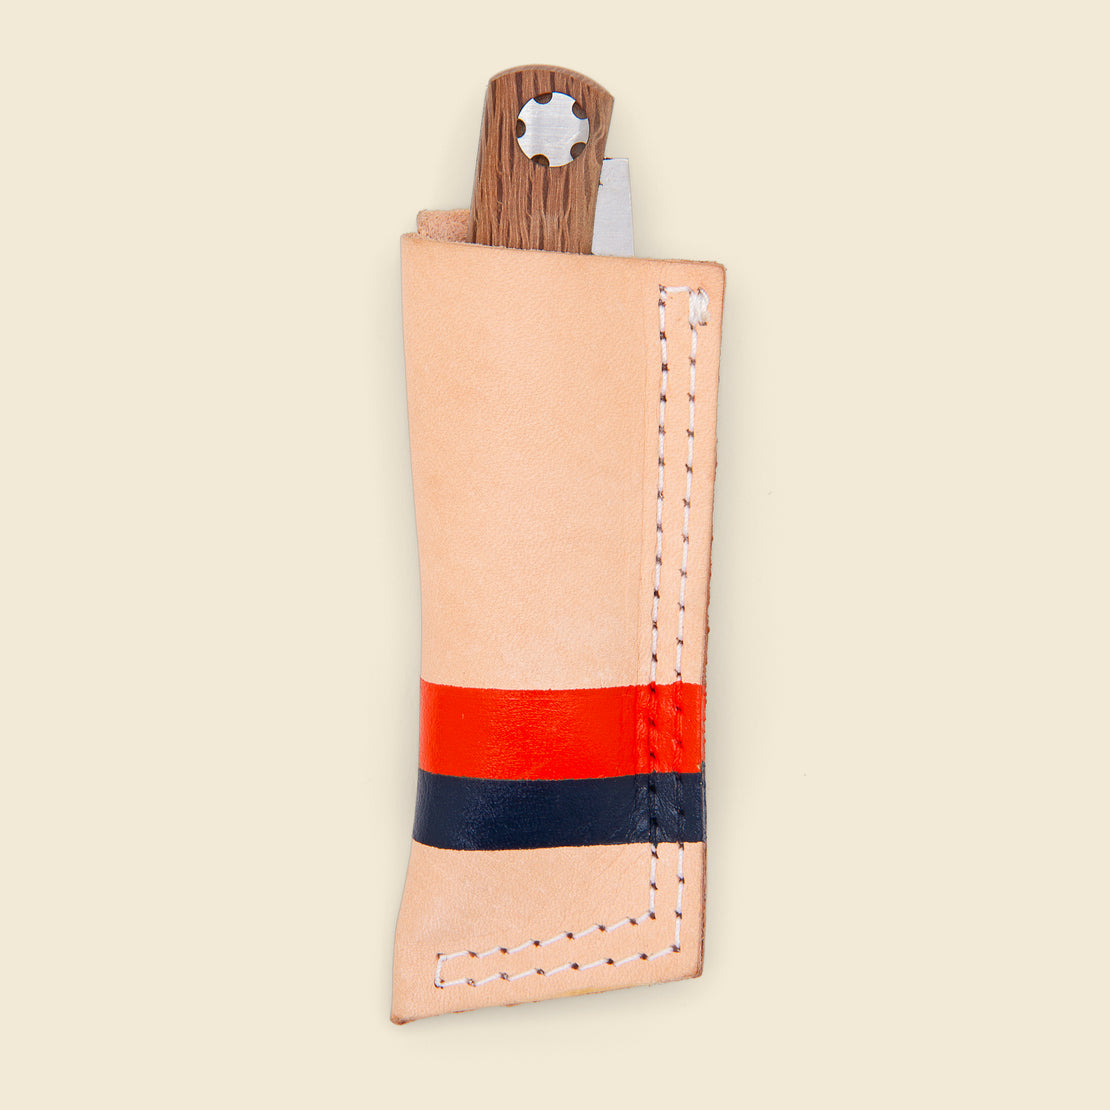 Son of a Sailor Leather Sheath with Joker Knife - Navy/Orange Painted